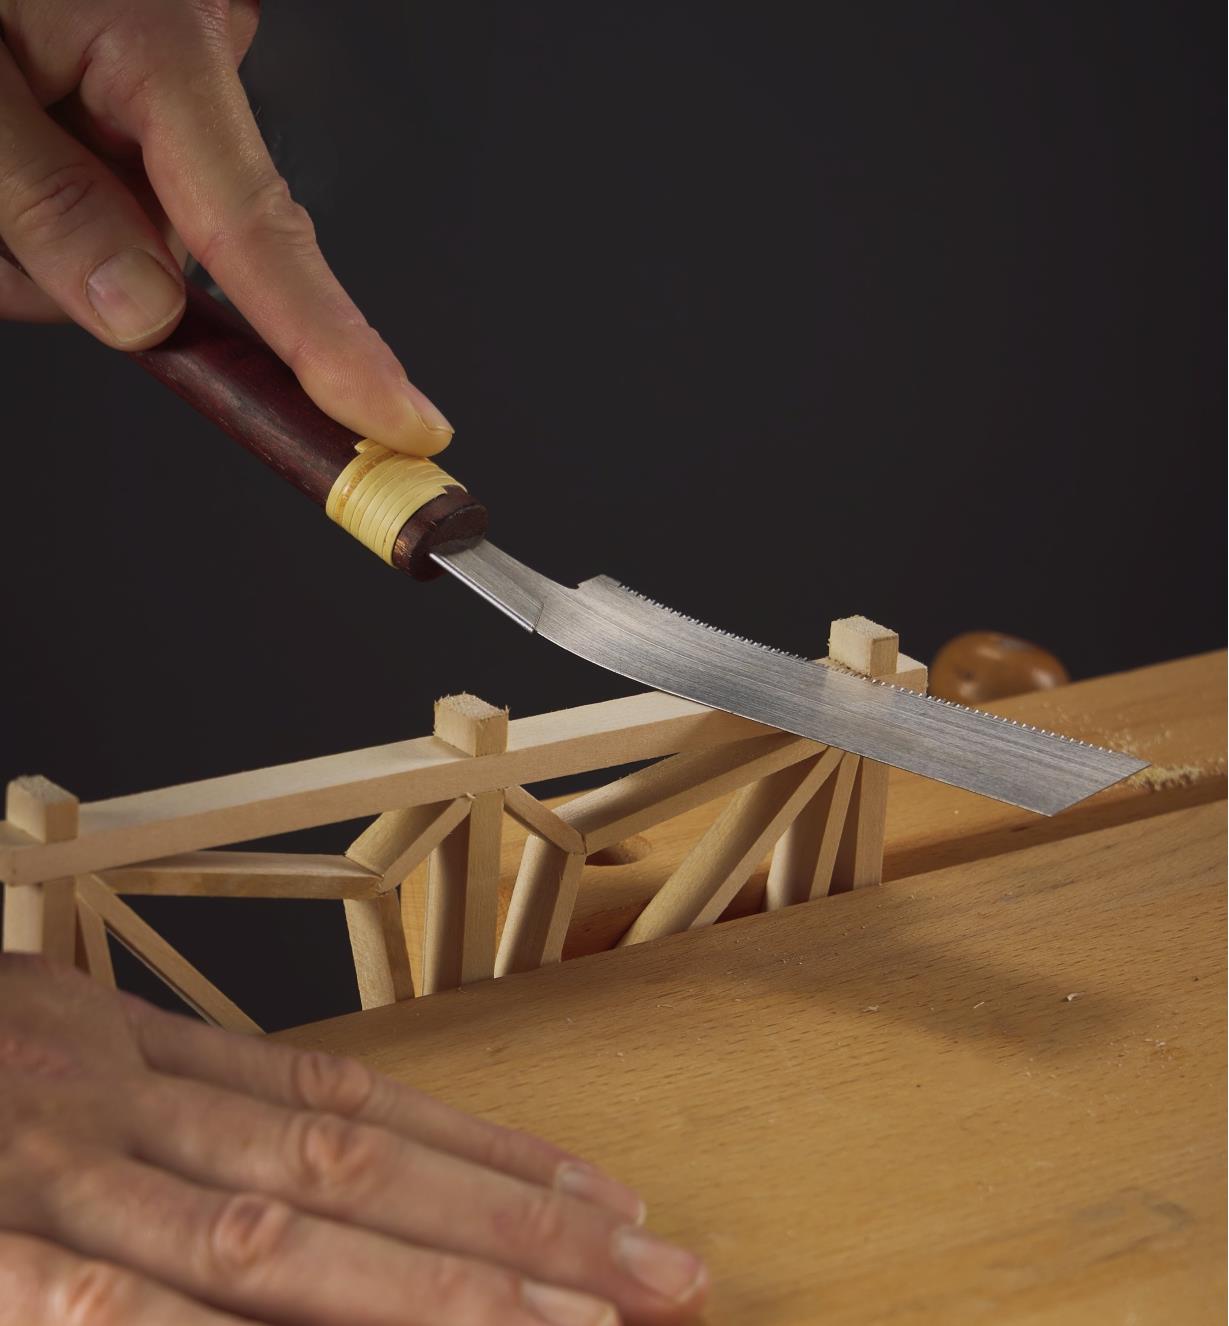 Using a Japanese kugihiki saw to flush-trim a wooden projection